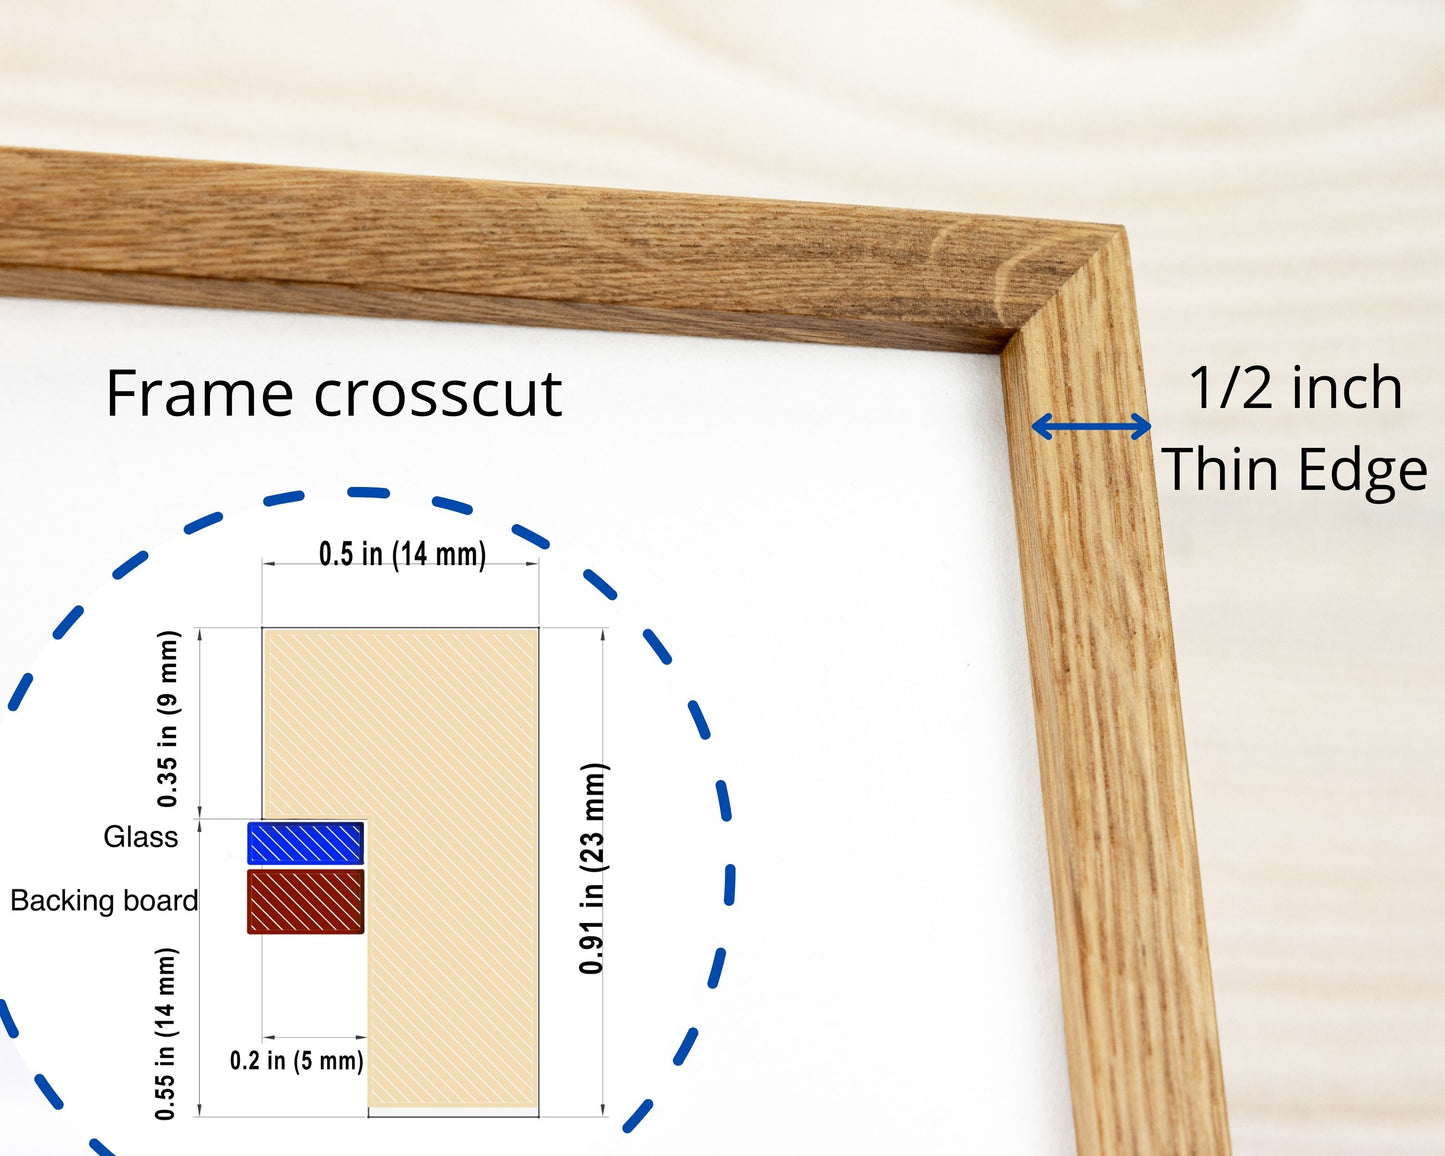 Super Slim Natural Hardwood Picture Frame, Natural Hardwood of Your Choice, 1/2 Thin Edge